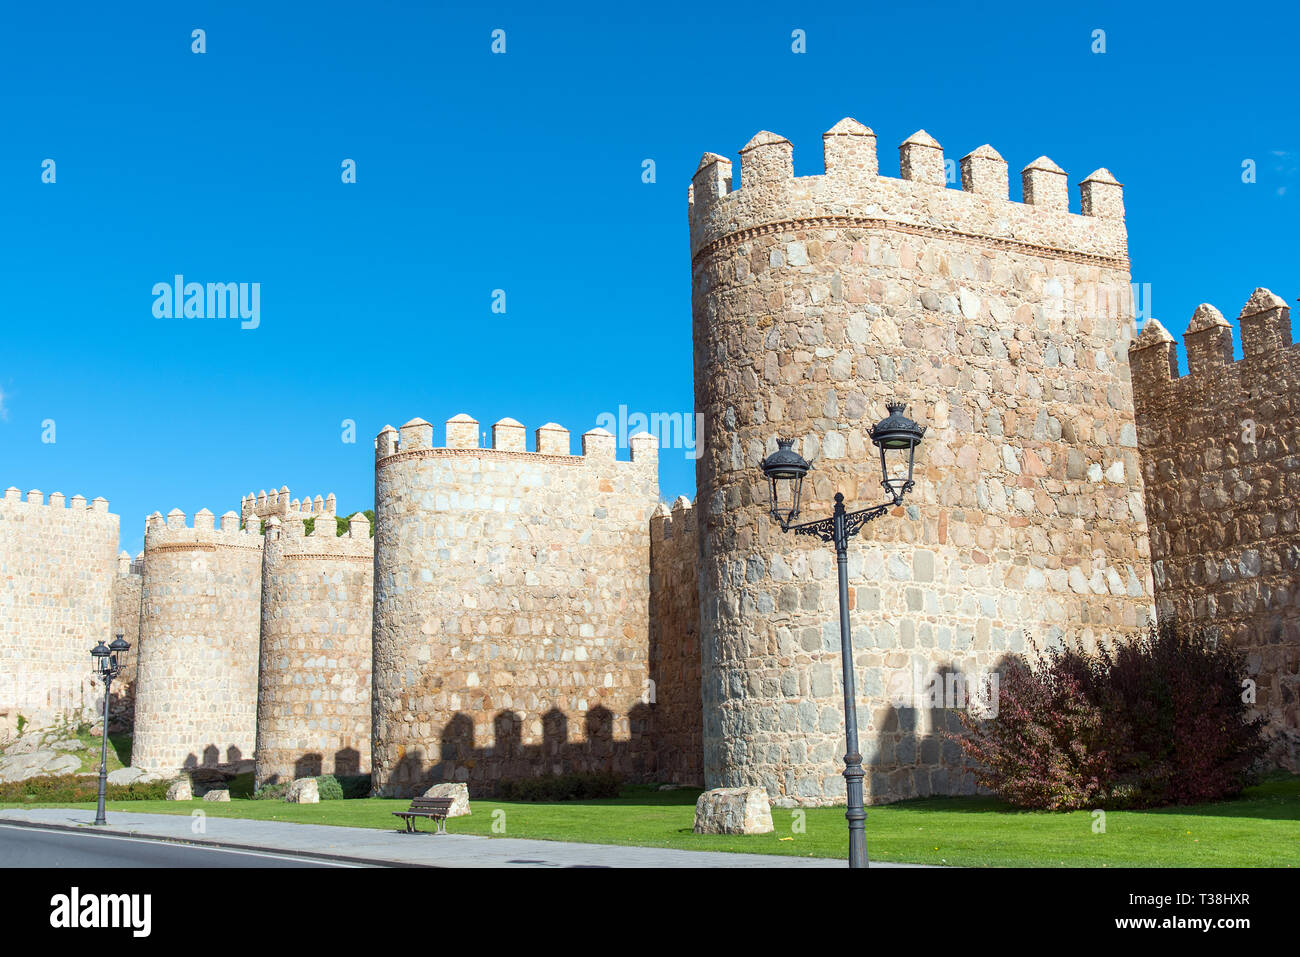 The famous city wall of Avila in Spain on a sunny day Stock Photo